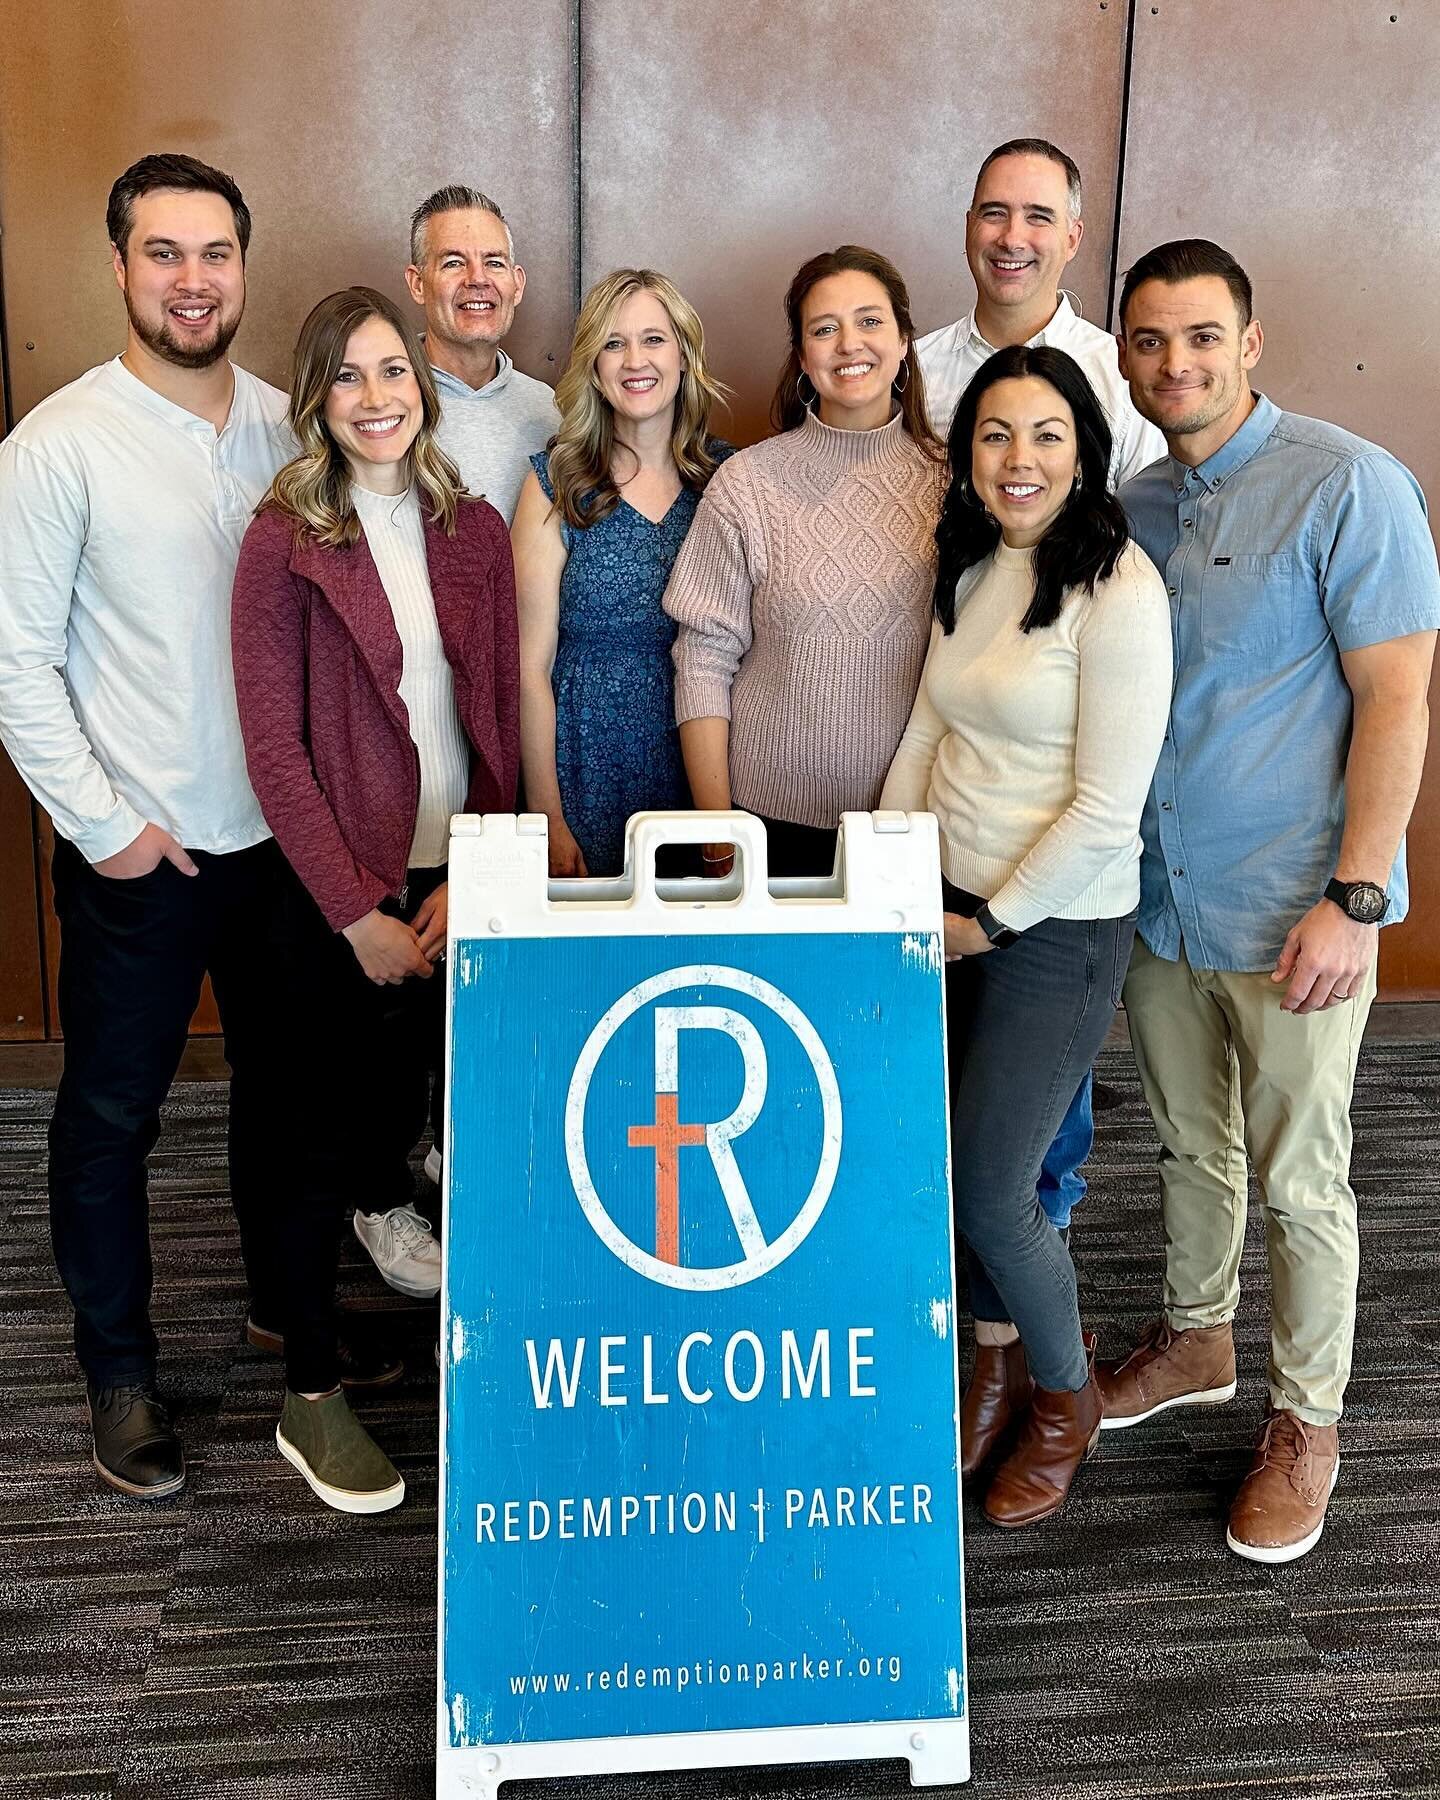 Happy 7th birthday, @redemptionprkr! This church is one of the sweetest and most unexpected joys of my life. I&rsquo;ll never get over the depth of community we experience here. I love these people so much. I love their commitment to the Lord, to one